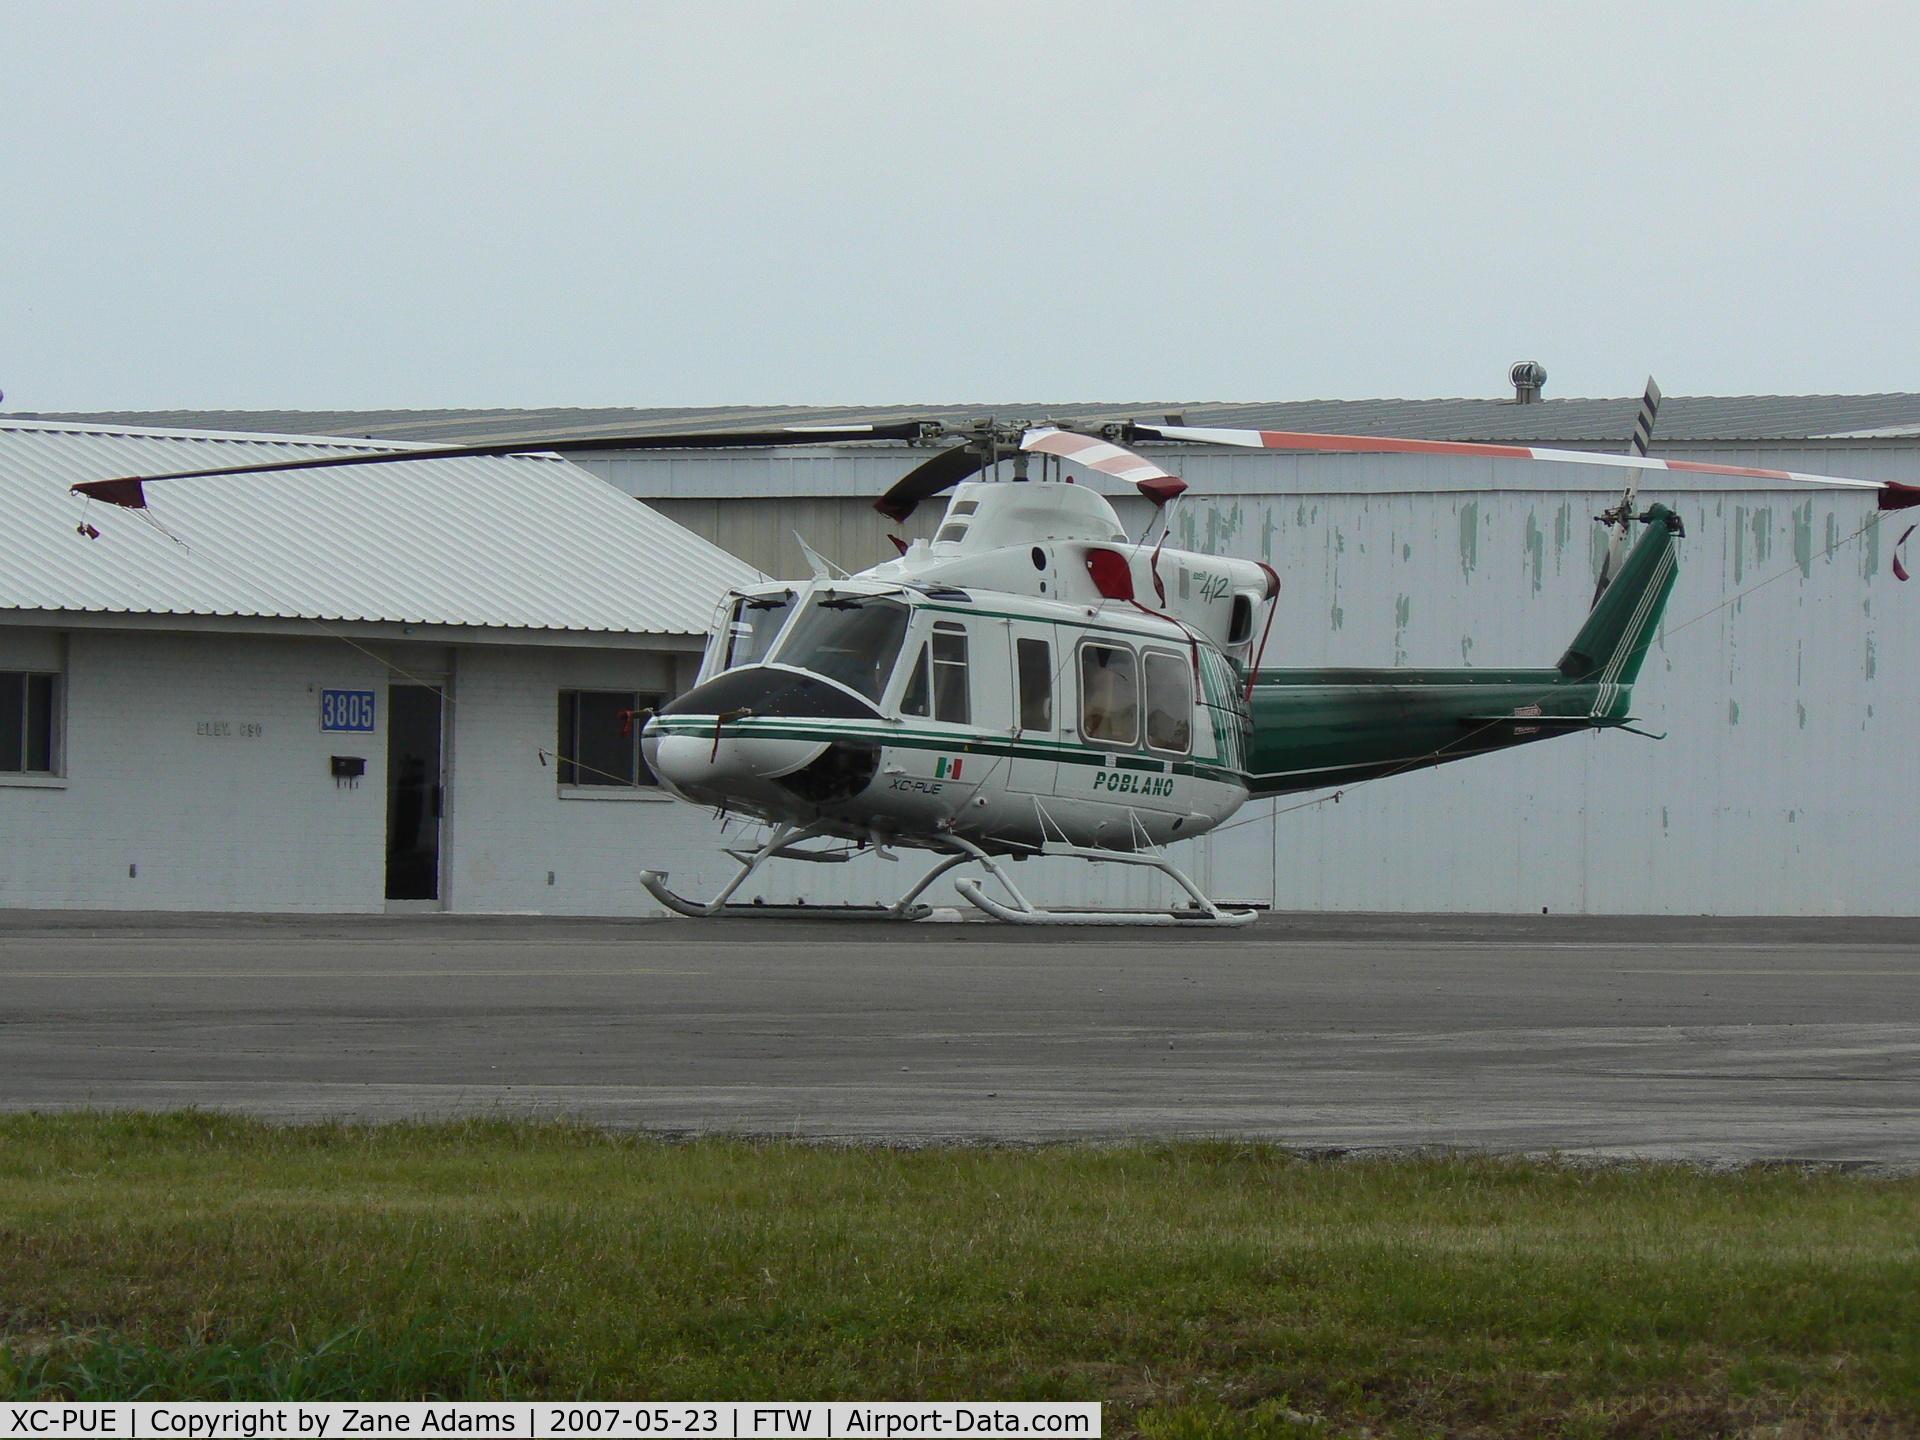 XC-PUE, 2006 Bell 412EP C/N 36418, Mexican Helo at Meacham